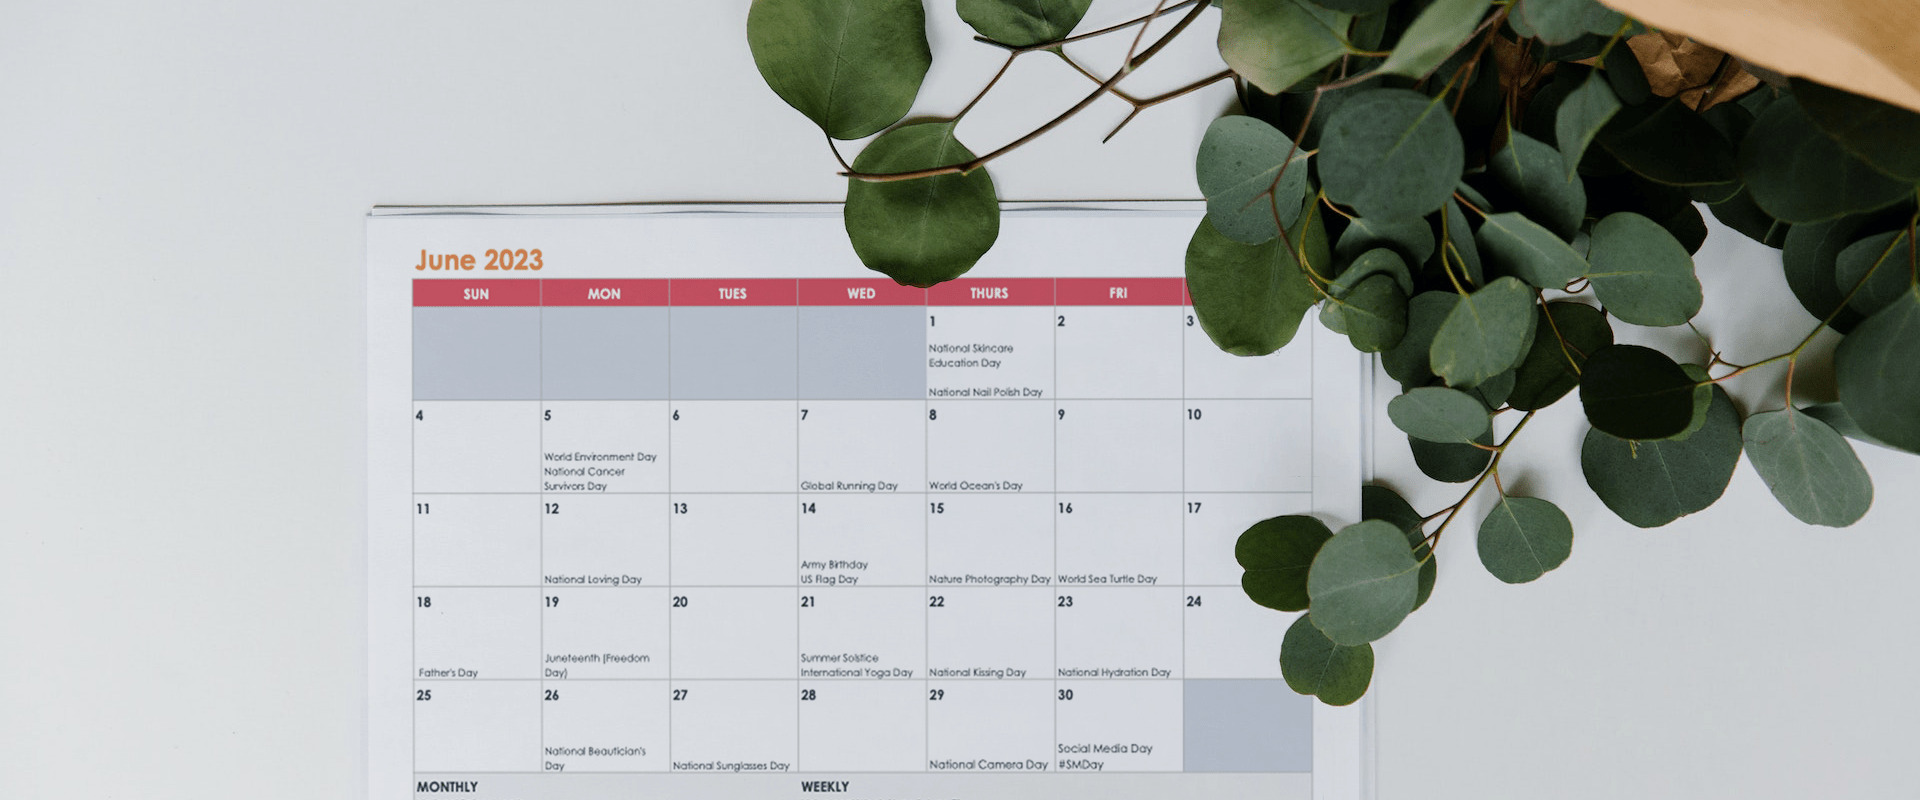 Plan your June social media content for your direct sales business with this June social media holidays calendar.